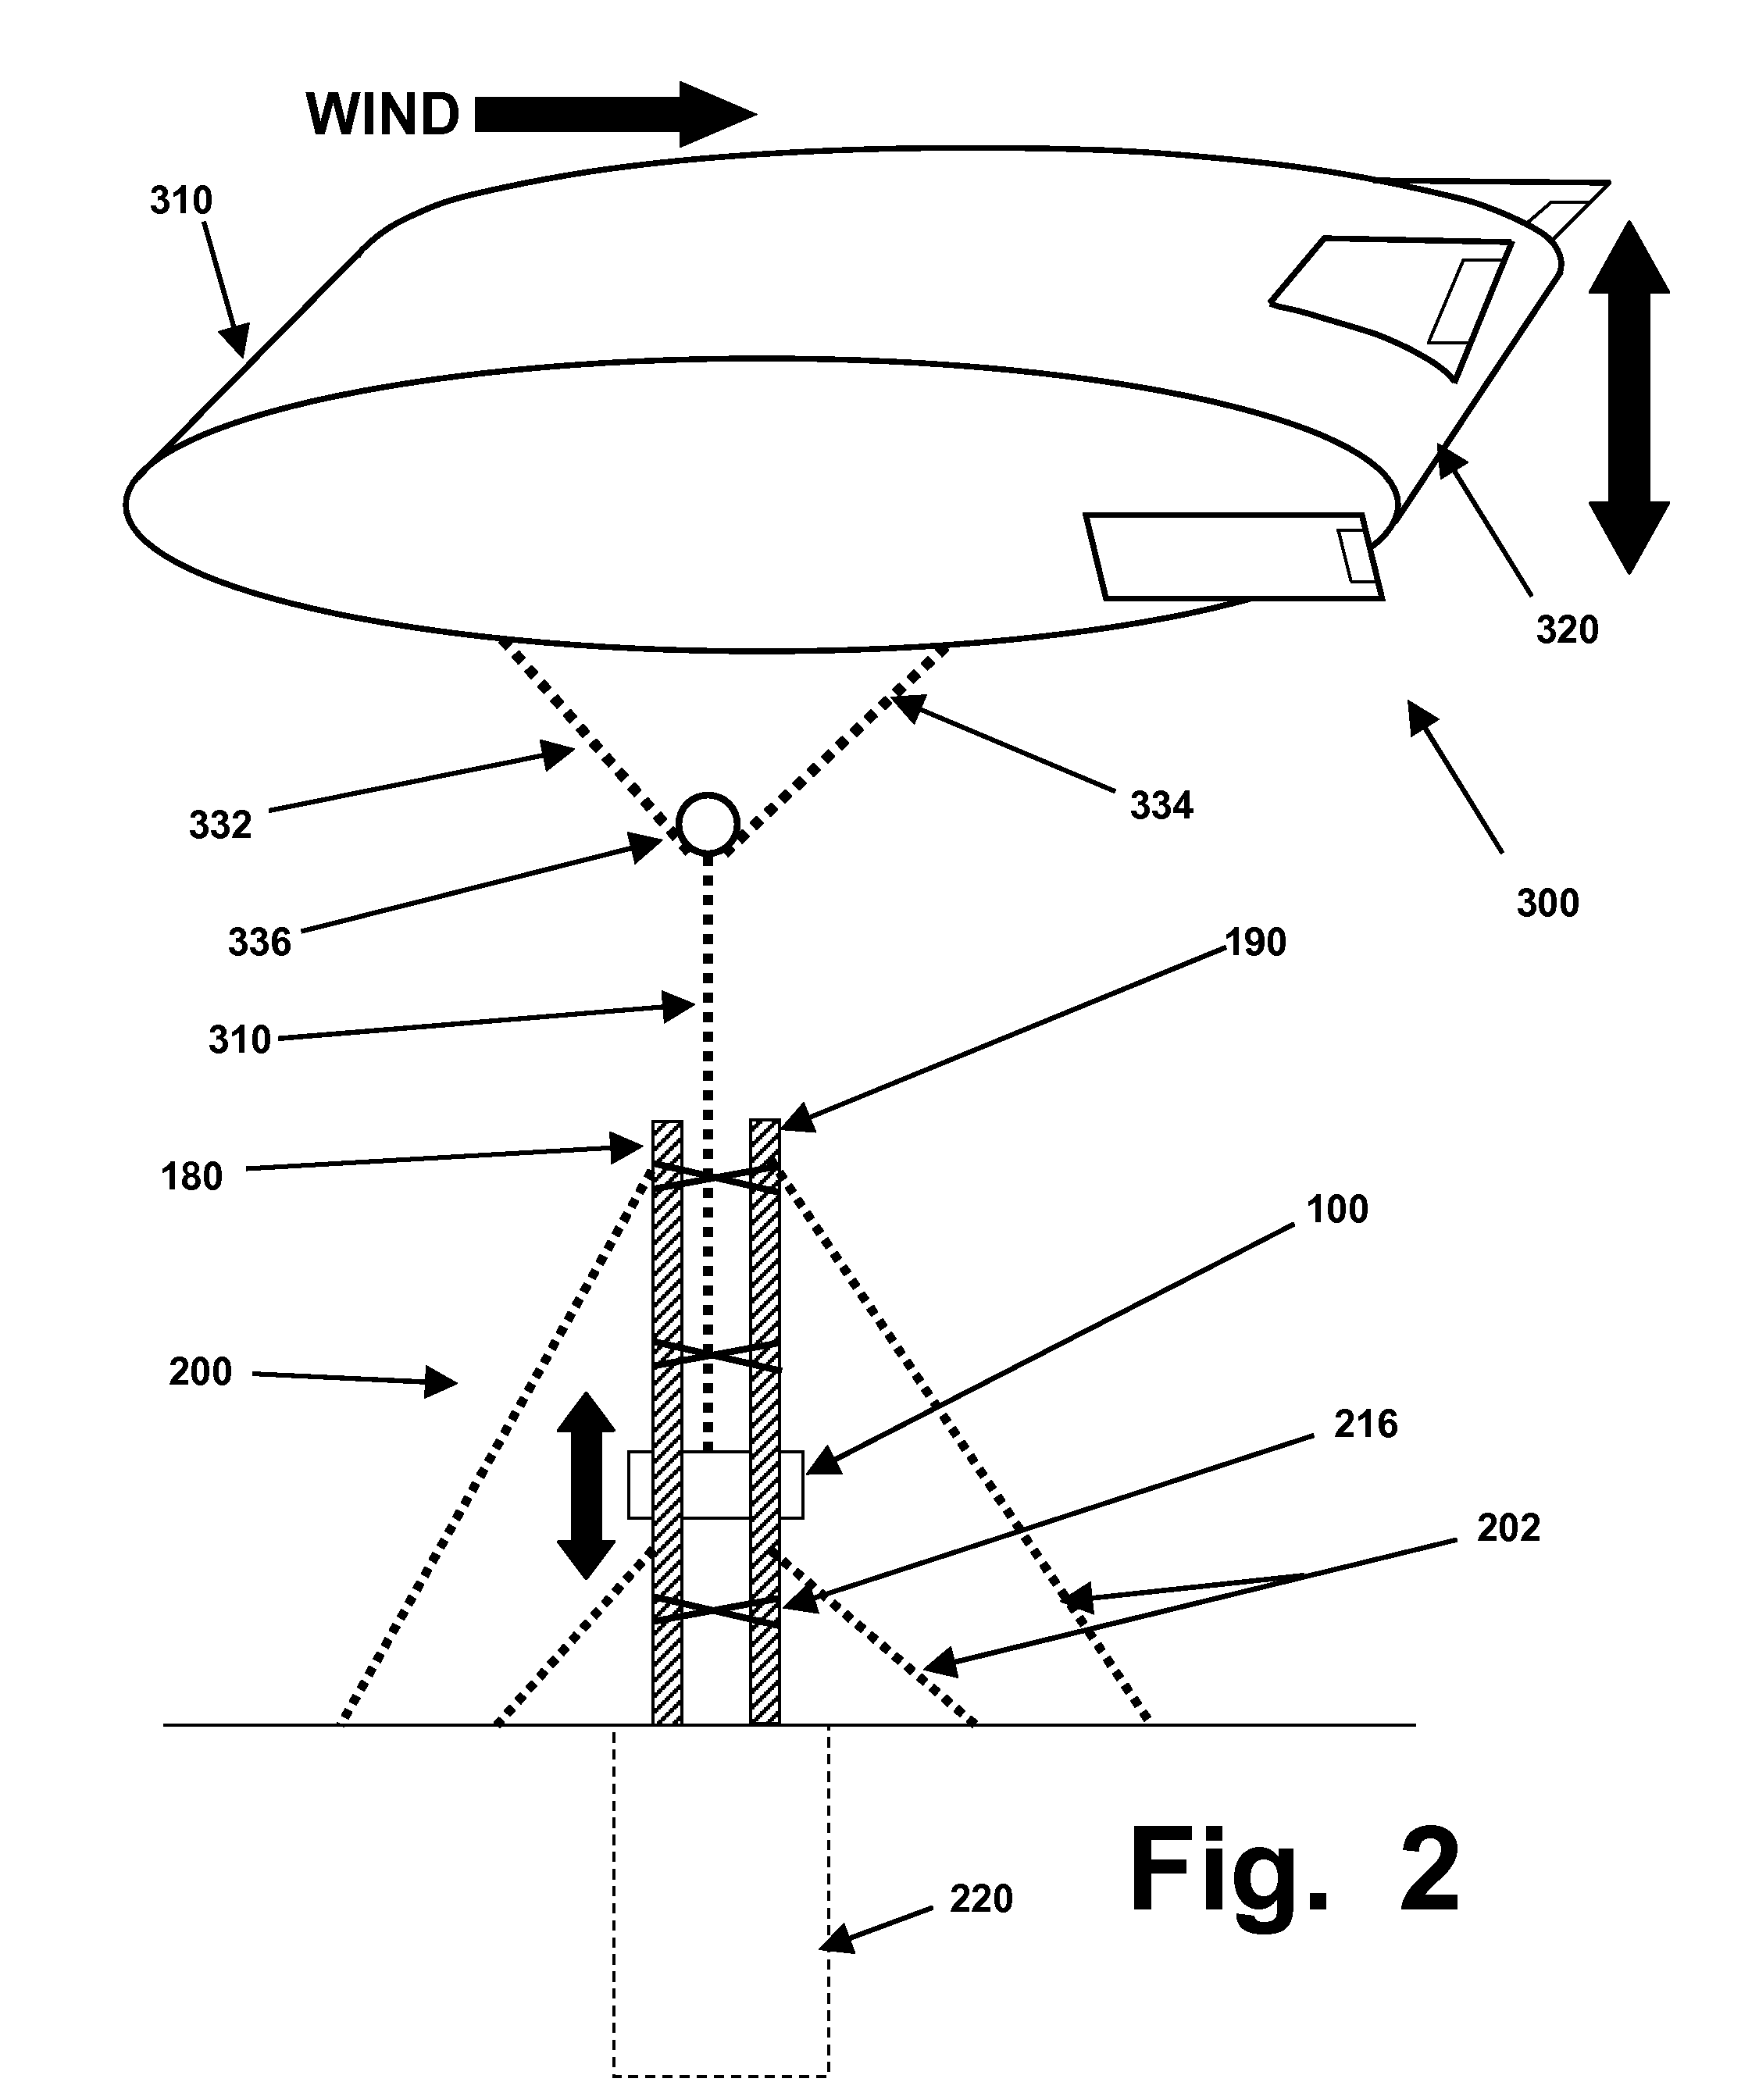 Reciprocating system with buoyant aircraft, spinnaker sail, and heavy cars for generating electric power